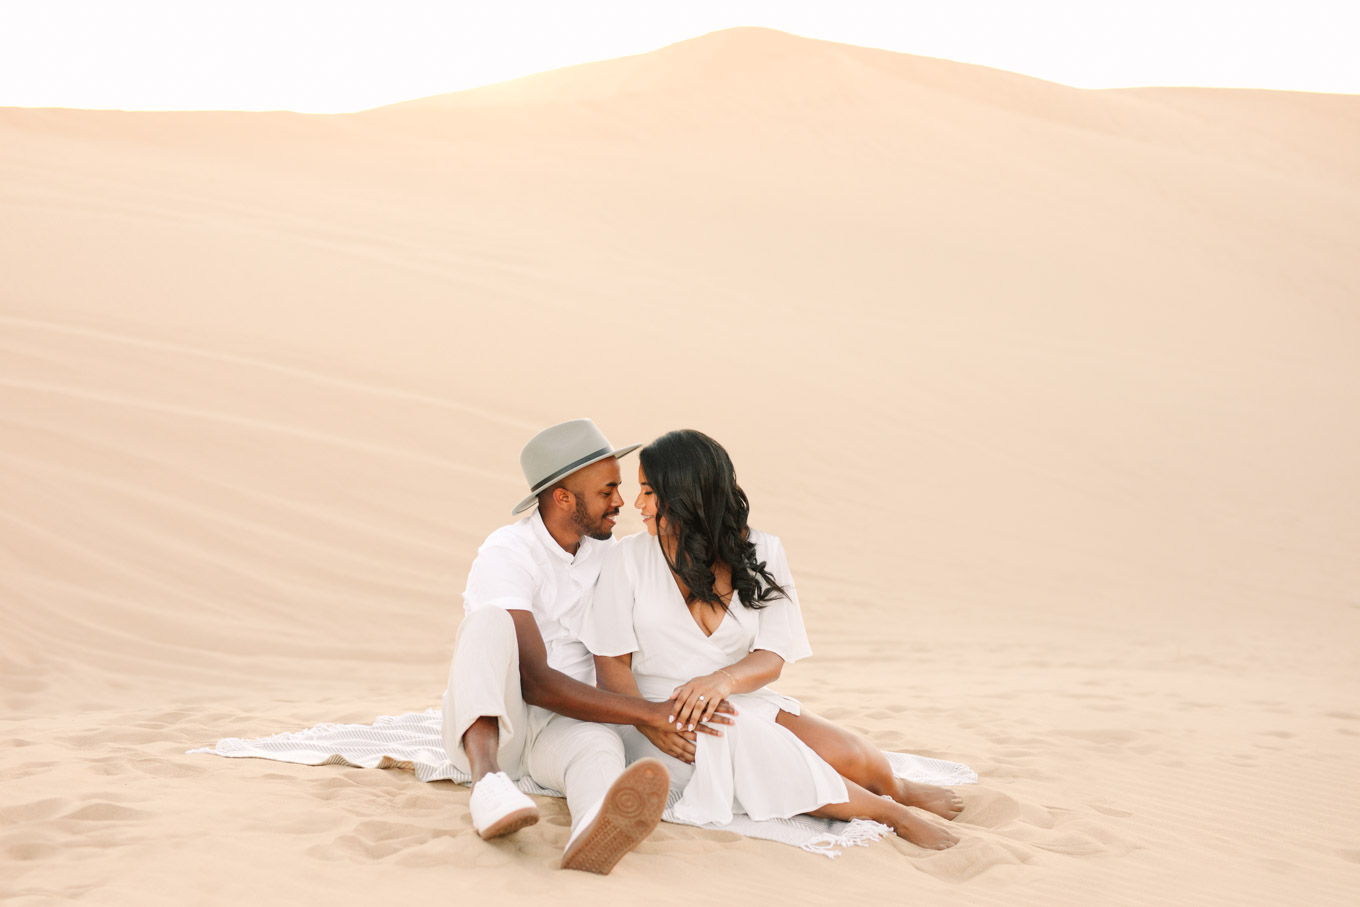 Engaged couple sitting together on a blanket in sand dunes | California Sand Dunes engagement session | Colorful Palm Springs wedding photography | #palmspringsphotographer #sanddunes #engagementsession #southerncalifornia  Source: Mary Costa Photography | Los Angeles